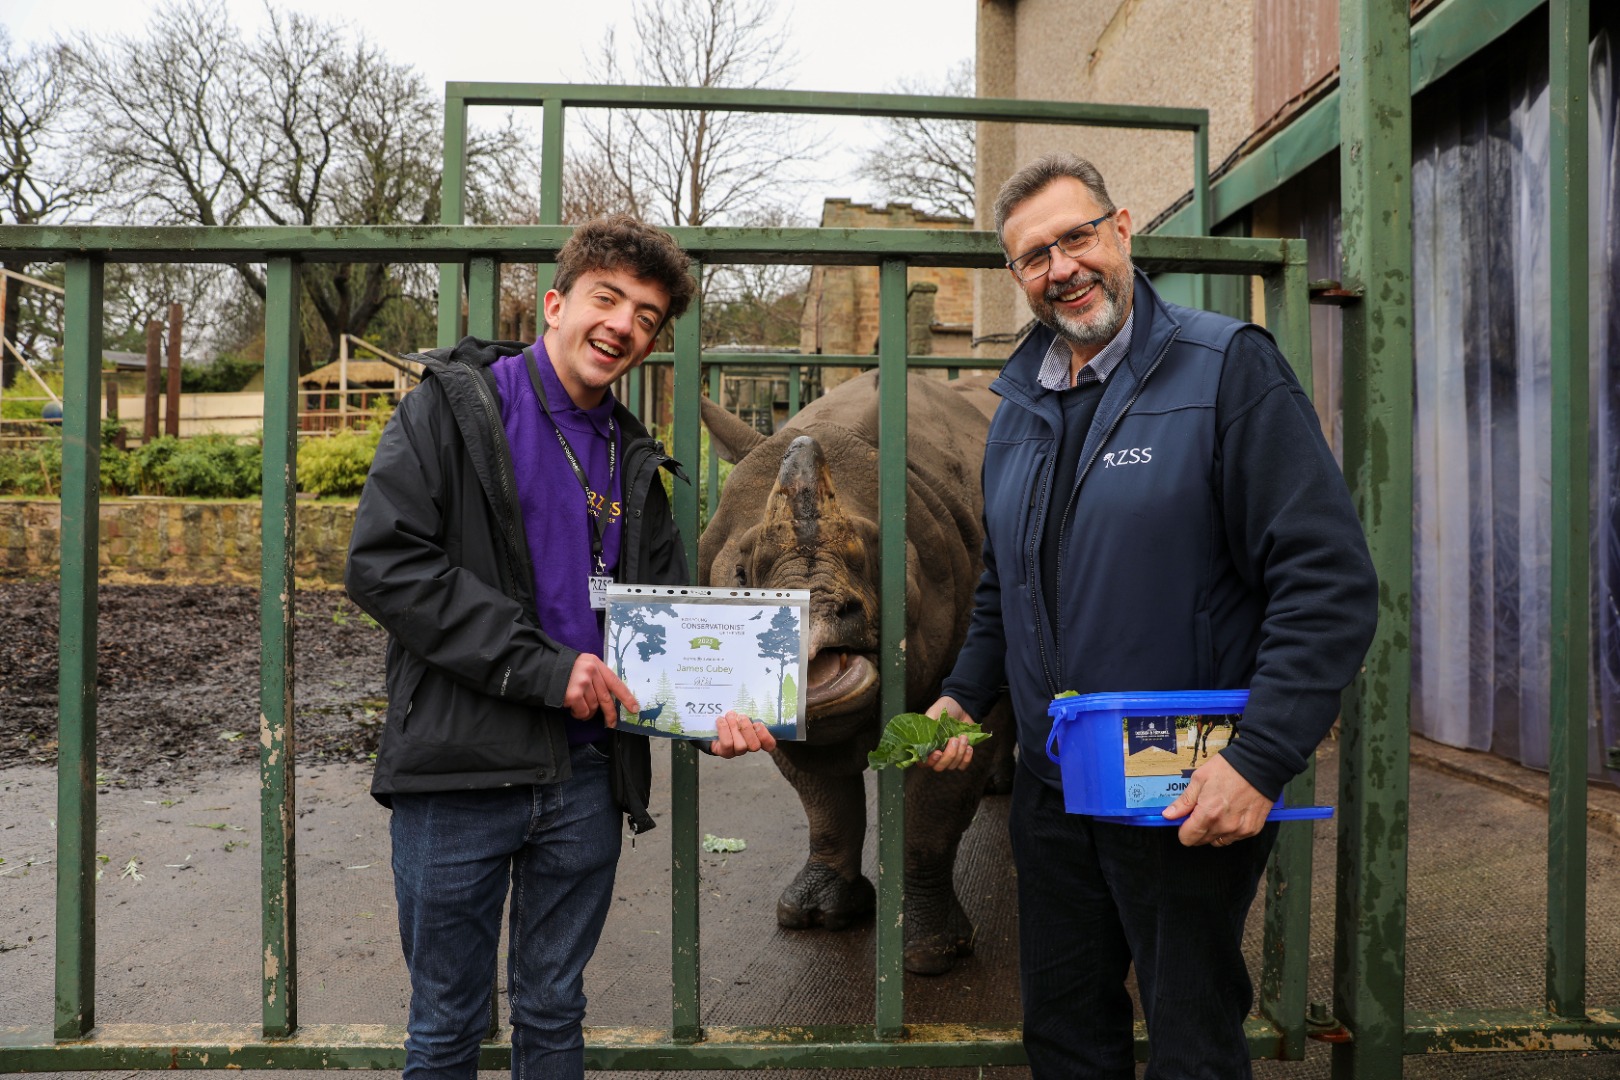 Young Conservationist of the Year award winner James Cubey with RZSS CEO David Field